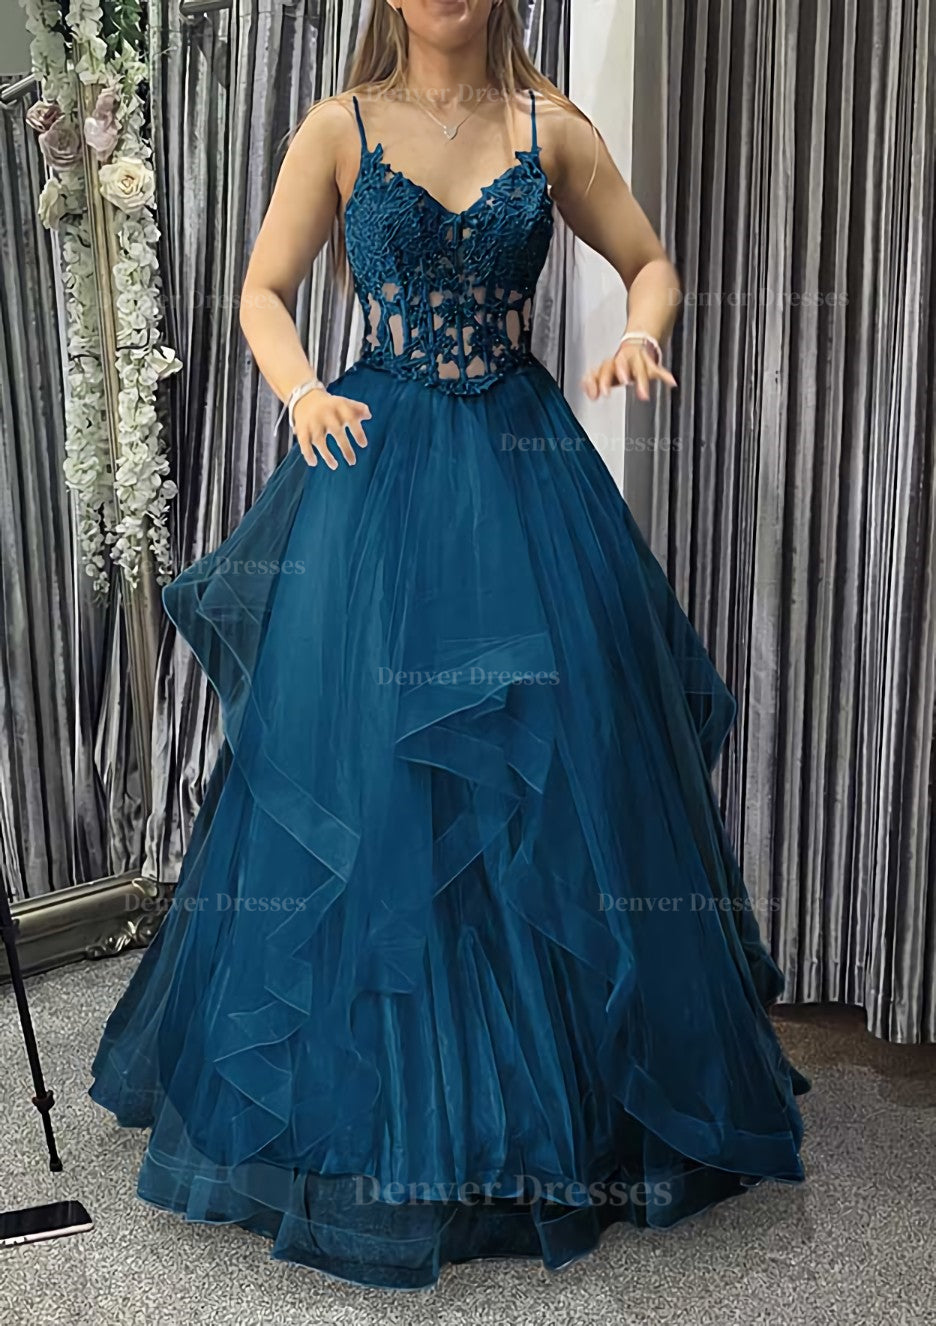 Prom Dresses Websites, A-line V Neck Sleeveless Long/Floor-Length Tulle Charmeuse Prom Dress With Appliqued Lace